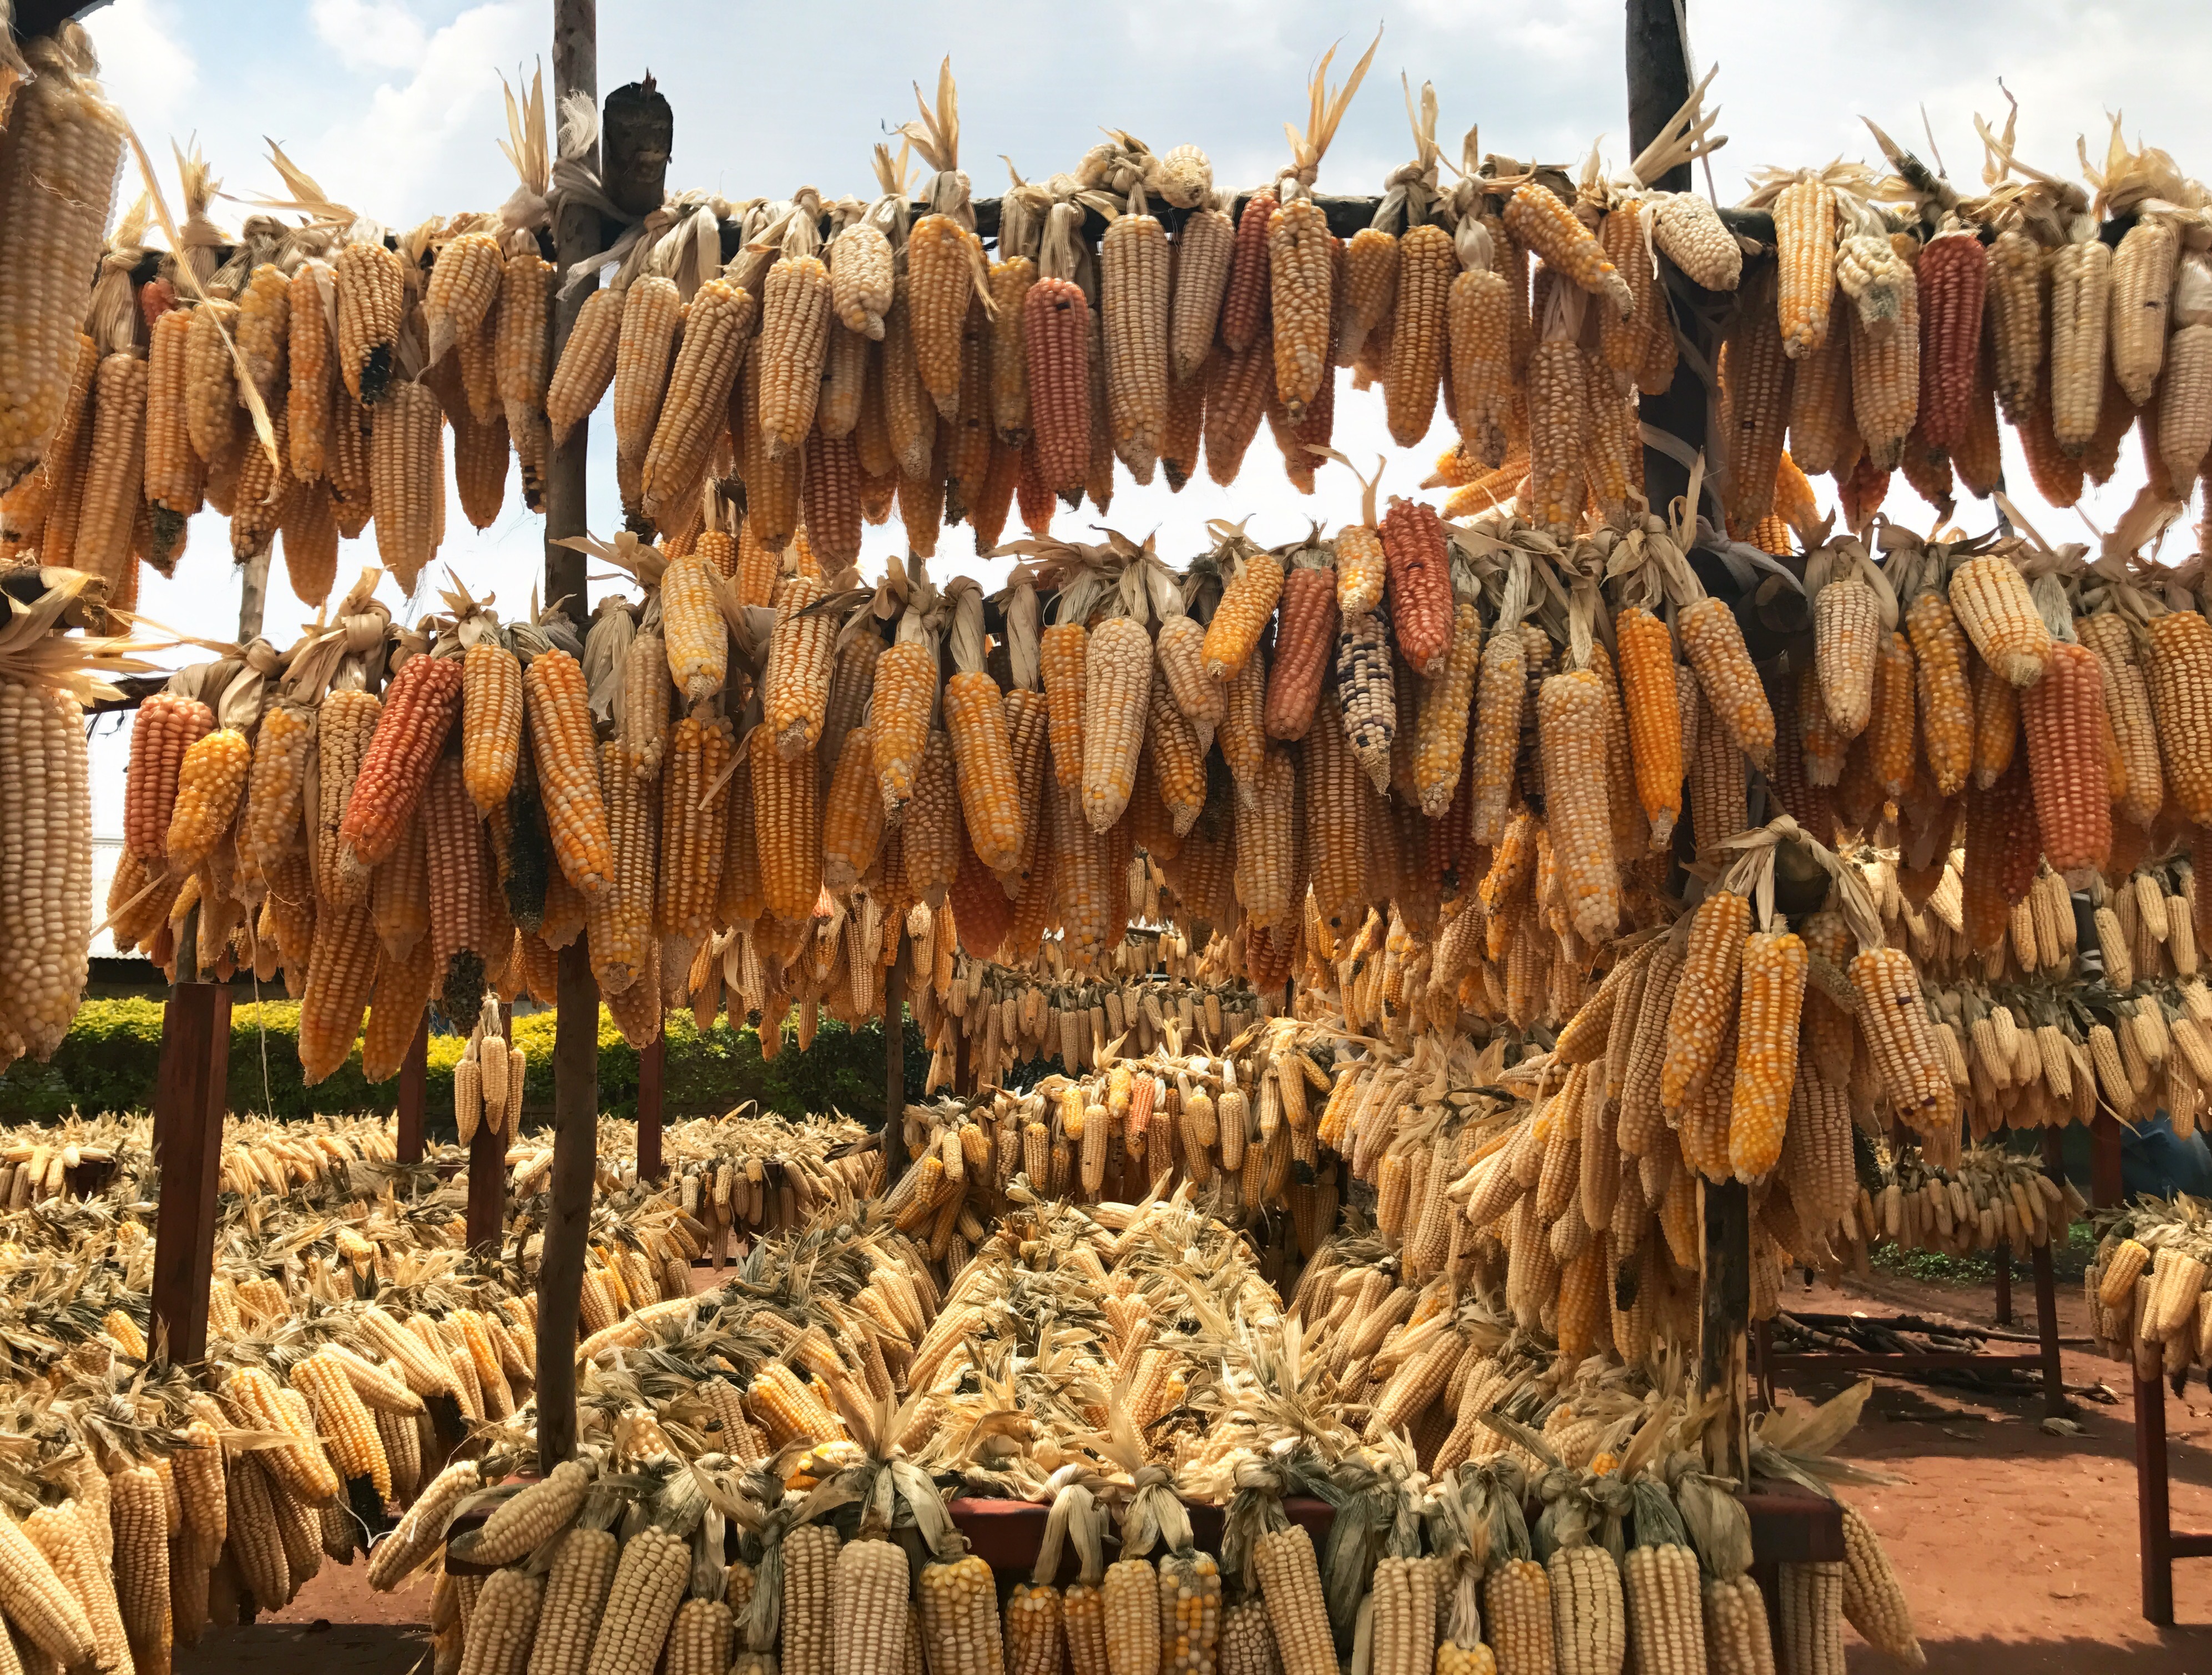 Dried maize cobs hanging